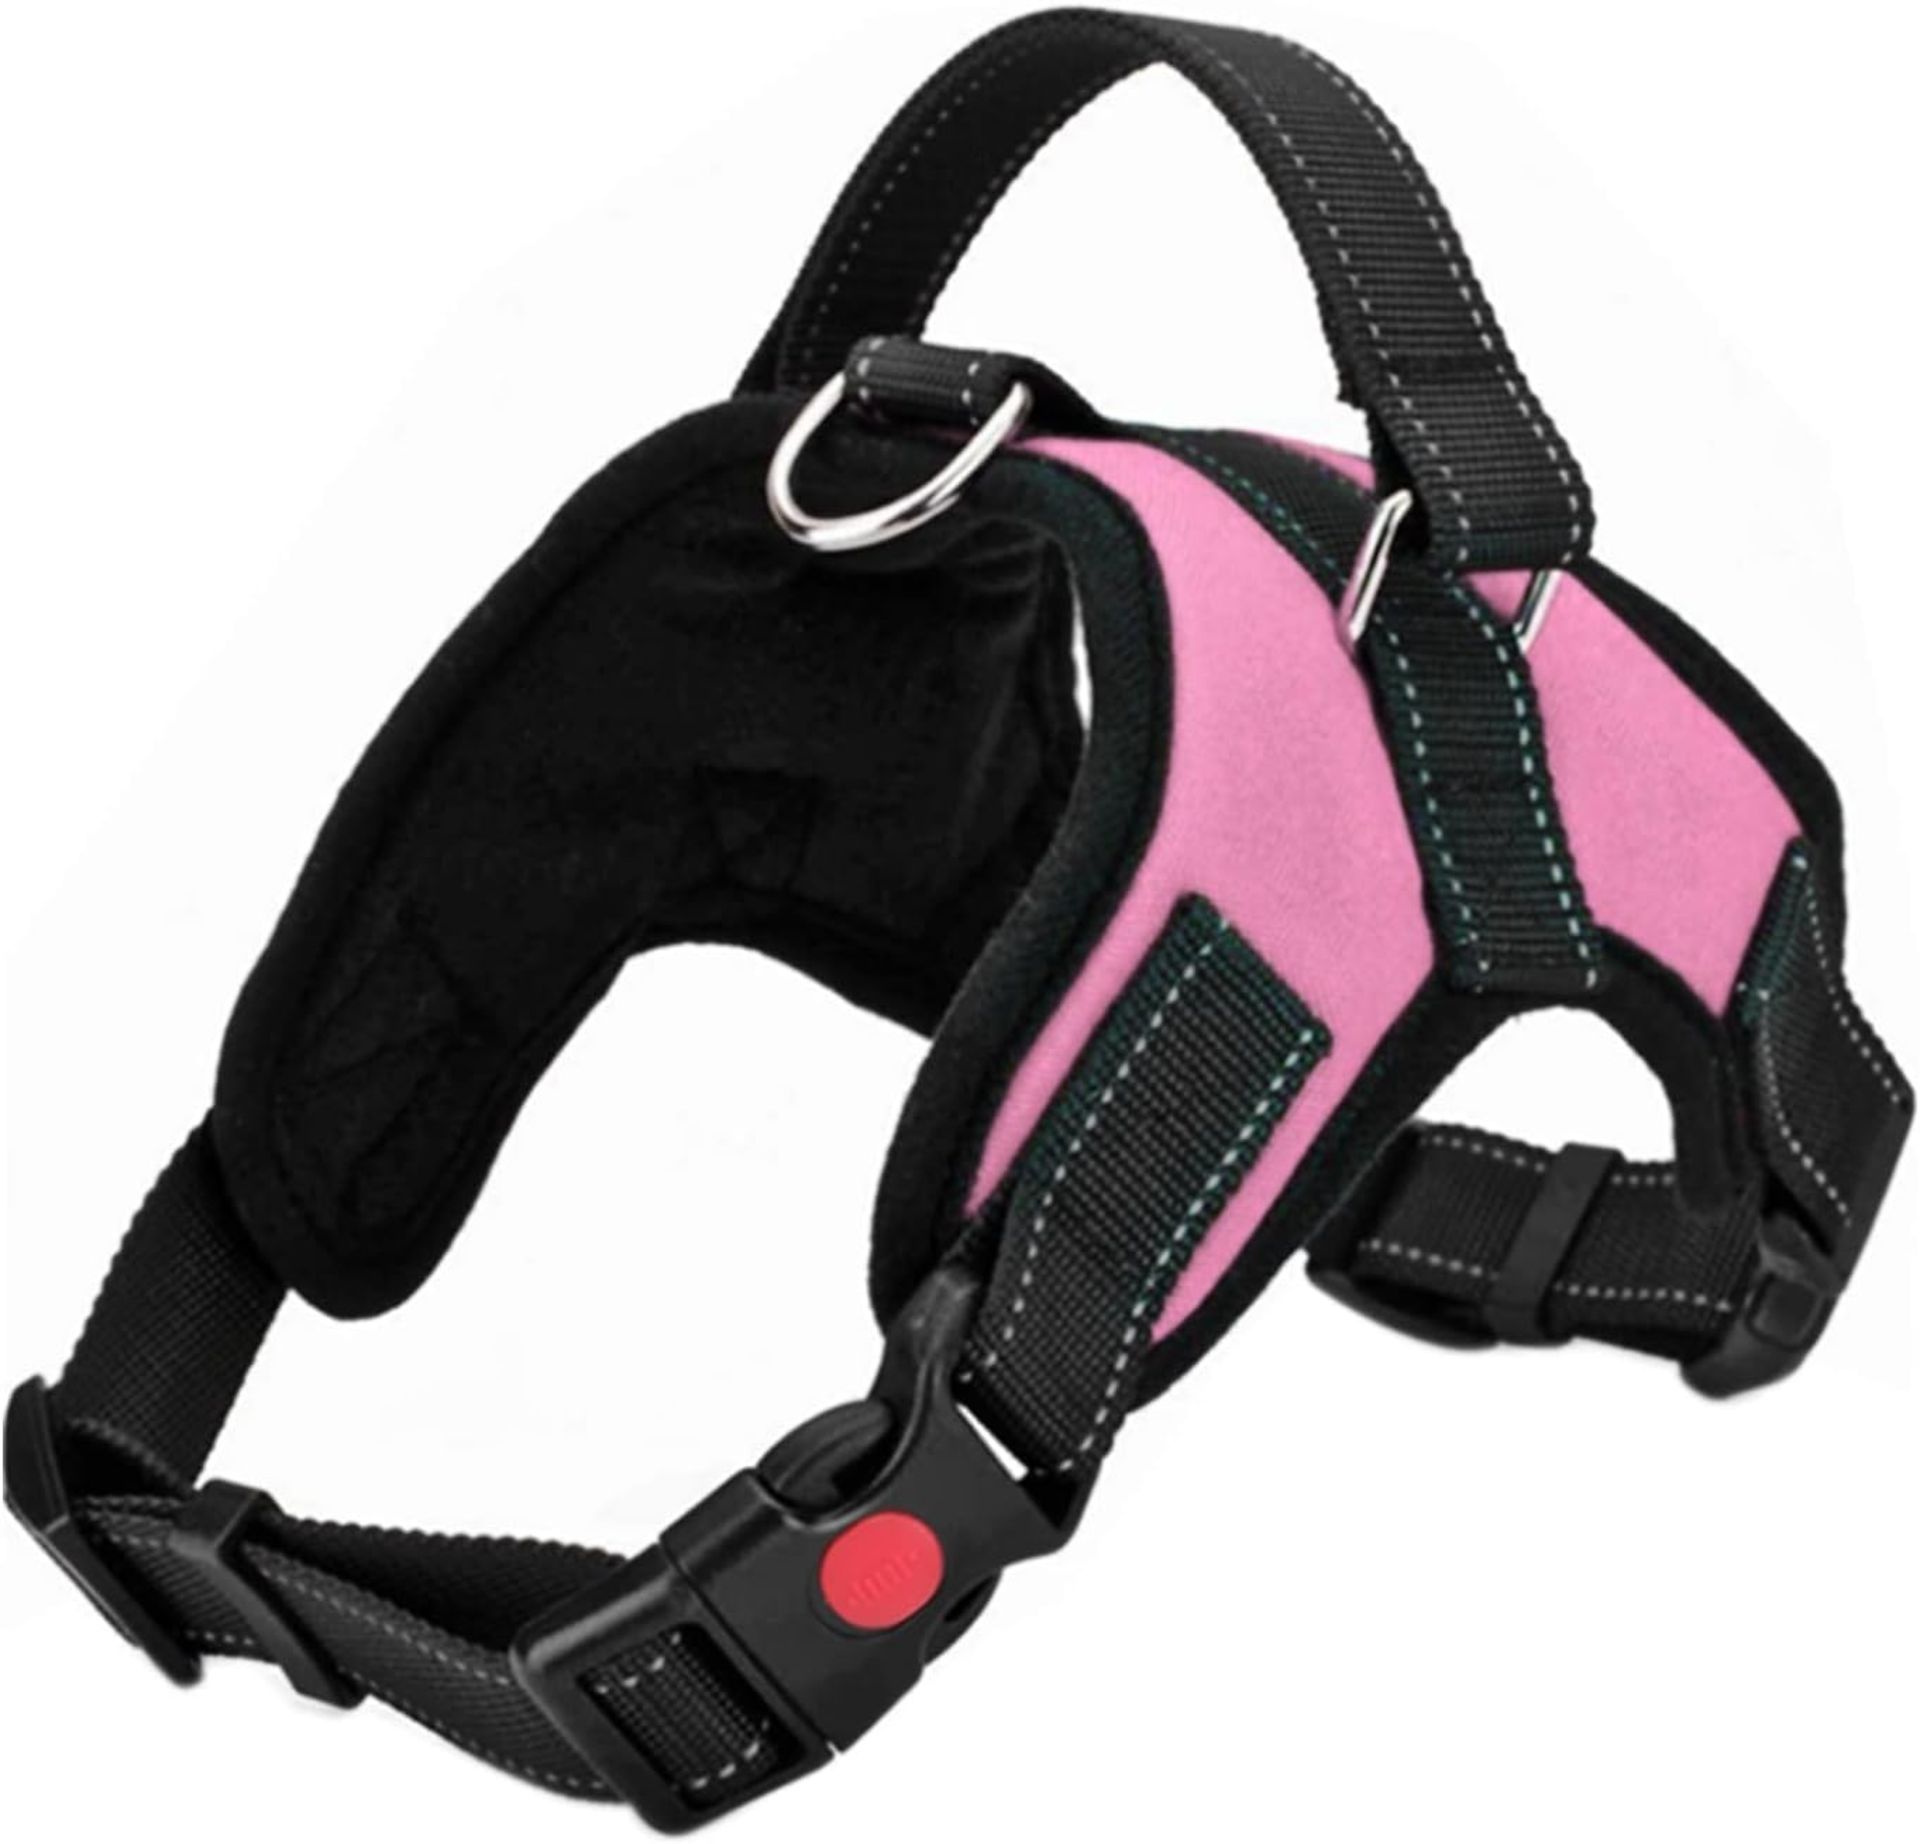 JOBLOT DOG HARNESS STRONG MIXED SIZES AND COLORS 300 PCS - Image 5 of 7